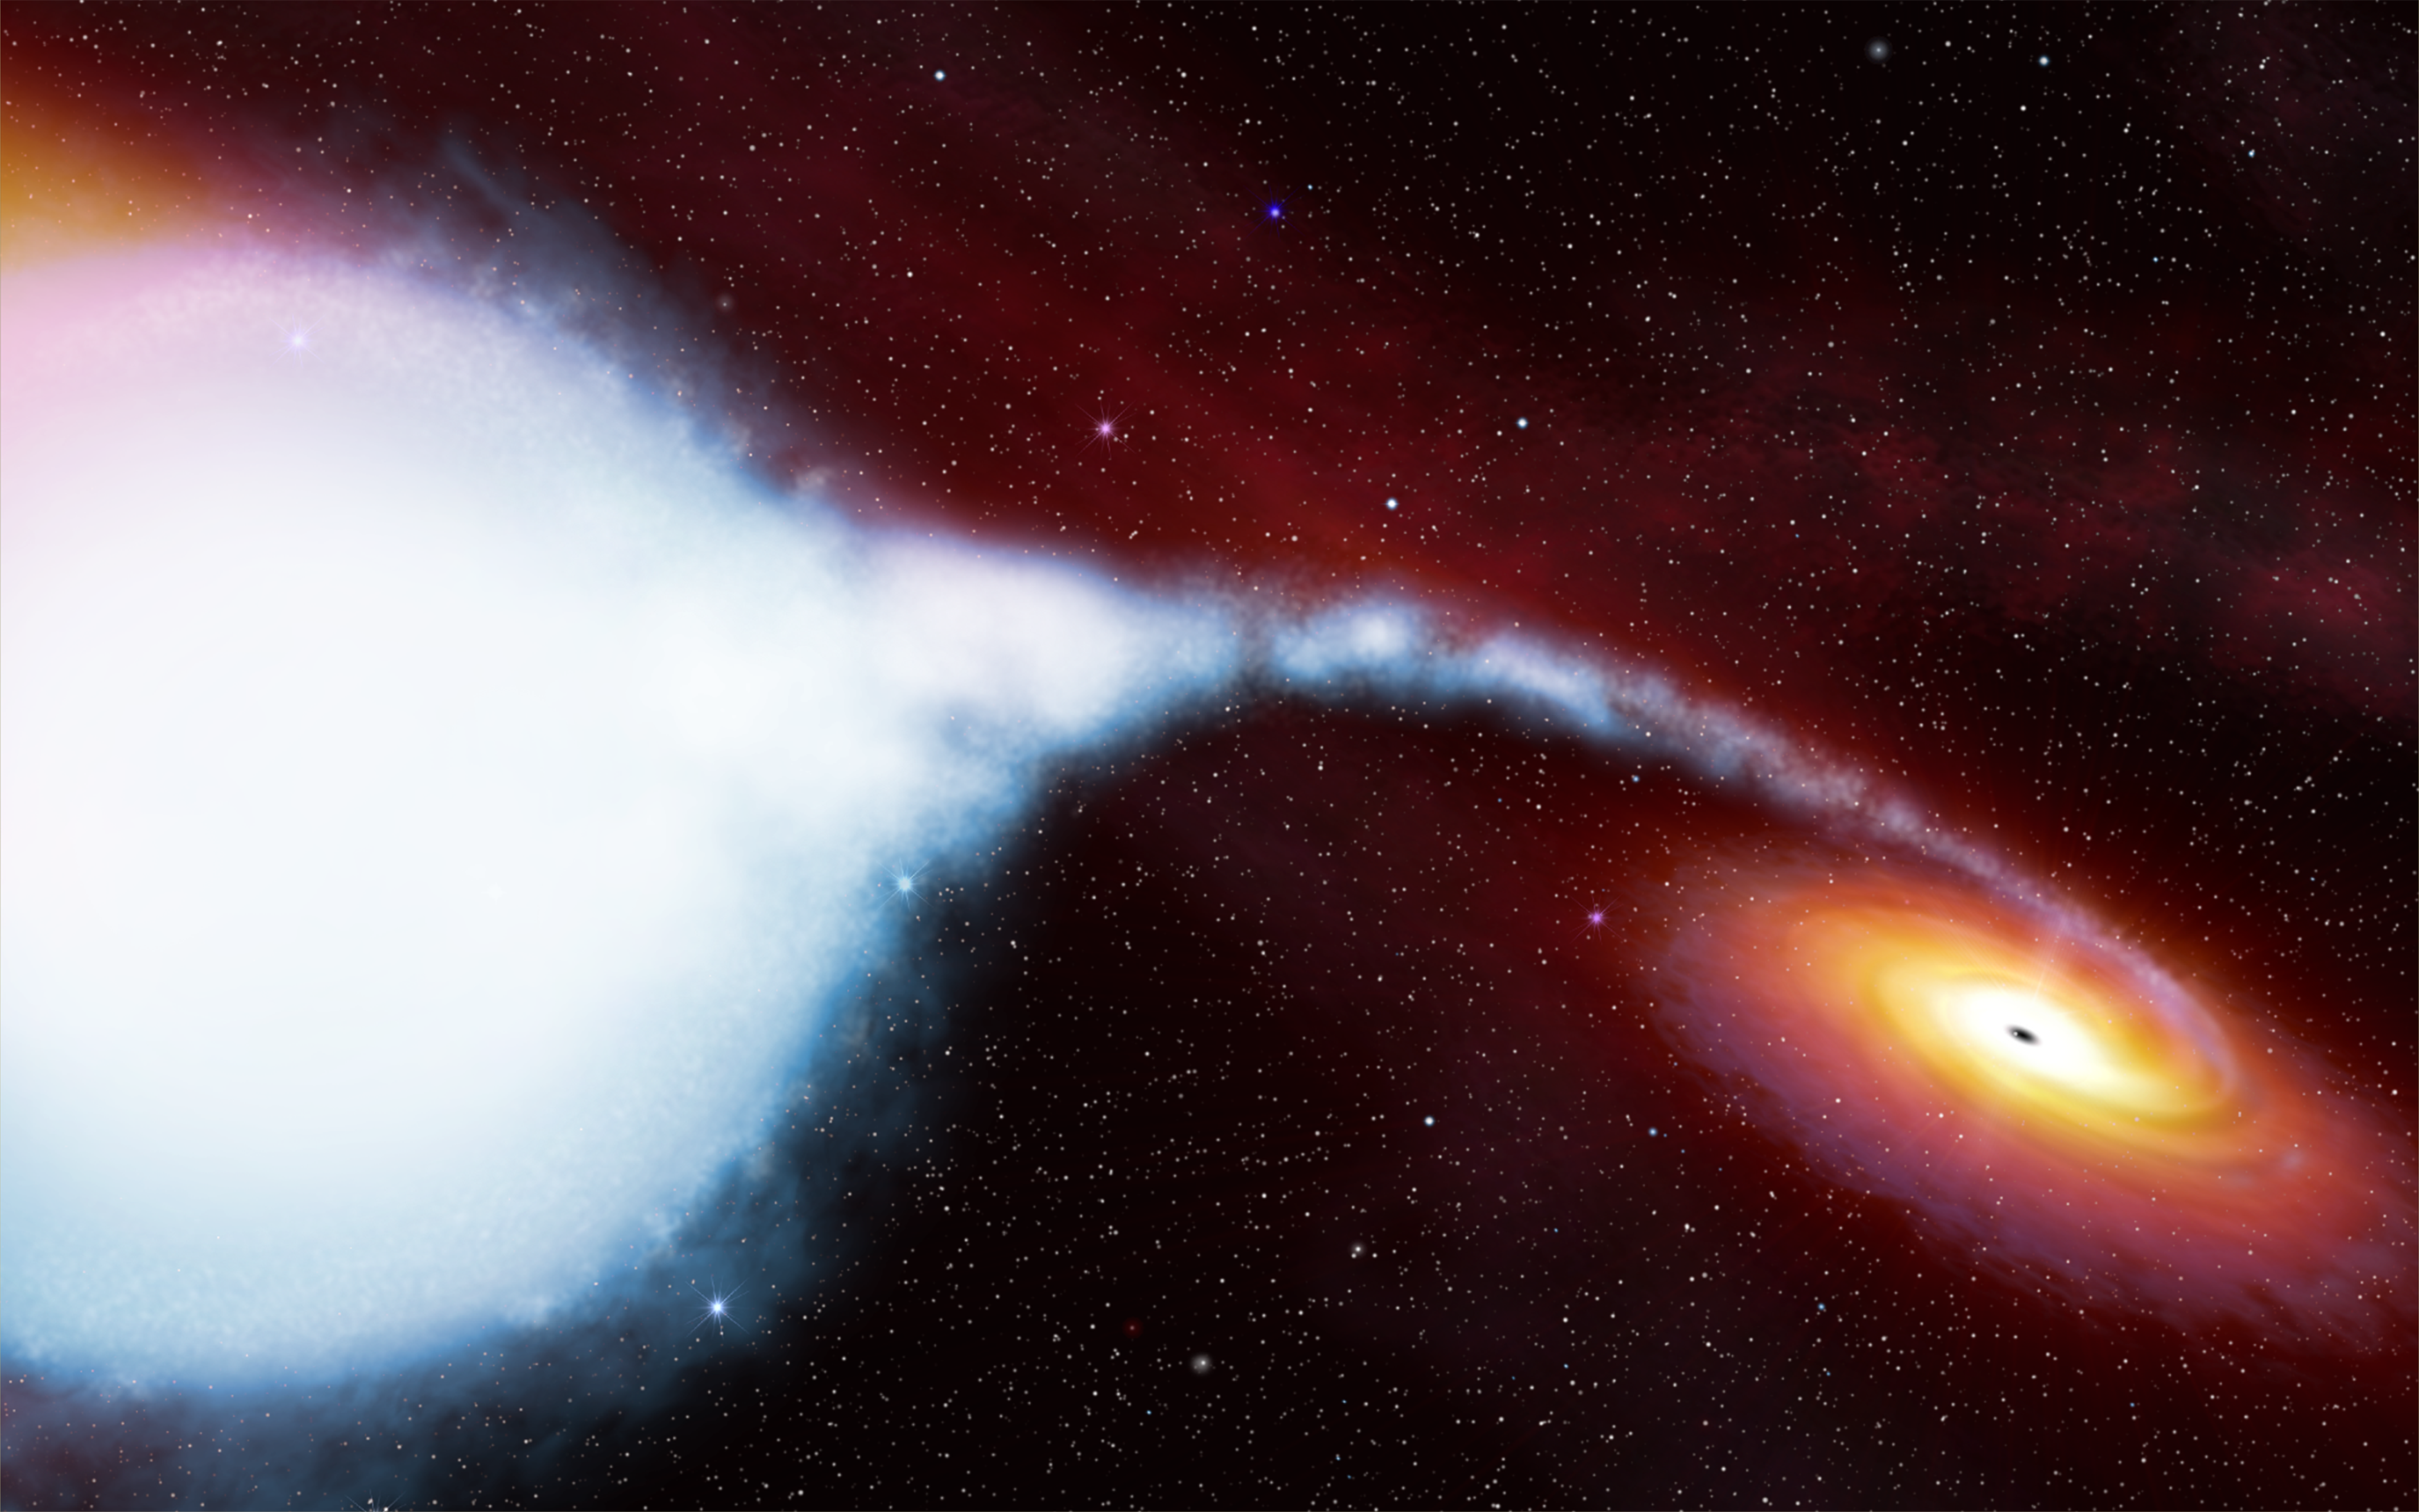 Sculpted by the gravity of black hole, Cygnus X-1 is shaped like a cosmic pear